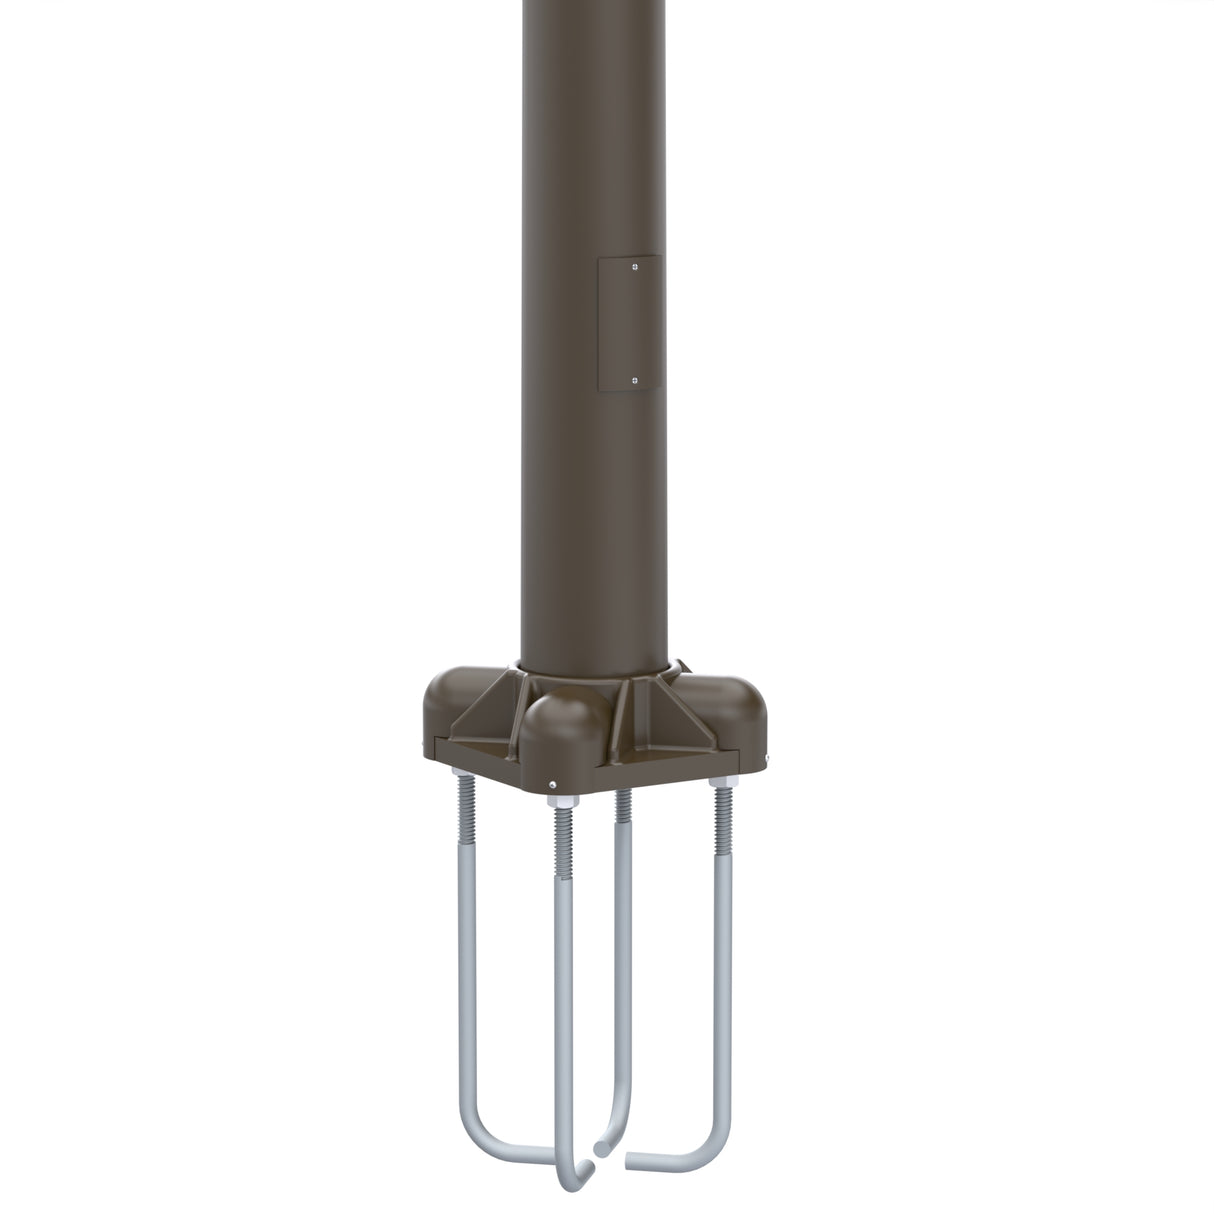 18' Tall x 6.0" Base OD x 4.0" Top OD x 0.188" Thick, Round Tapered Aluminum, Anchor Base Light Pole